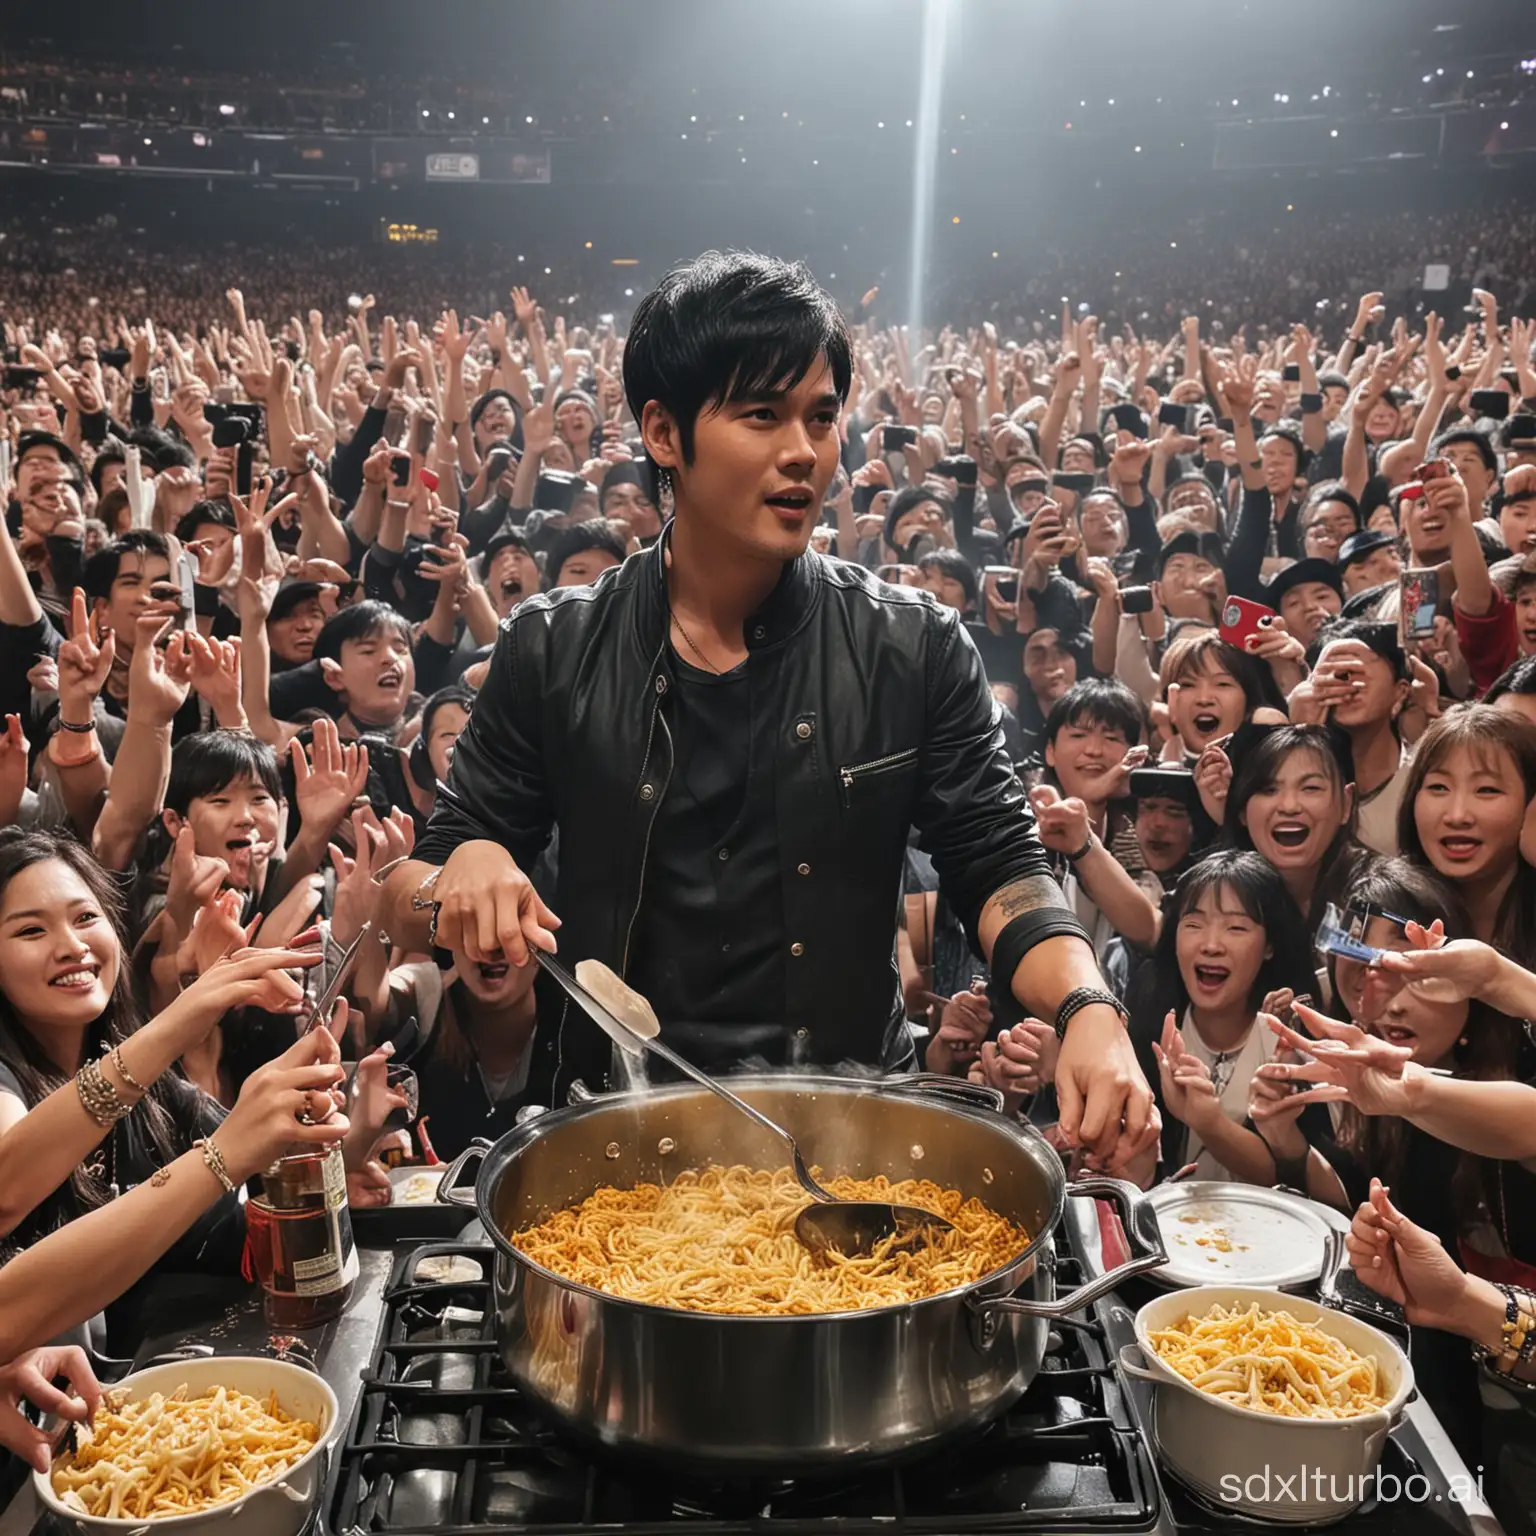 The singer Jay Chou is cooking at his own concert, surrounded by fans watching.